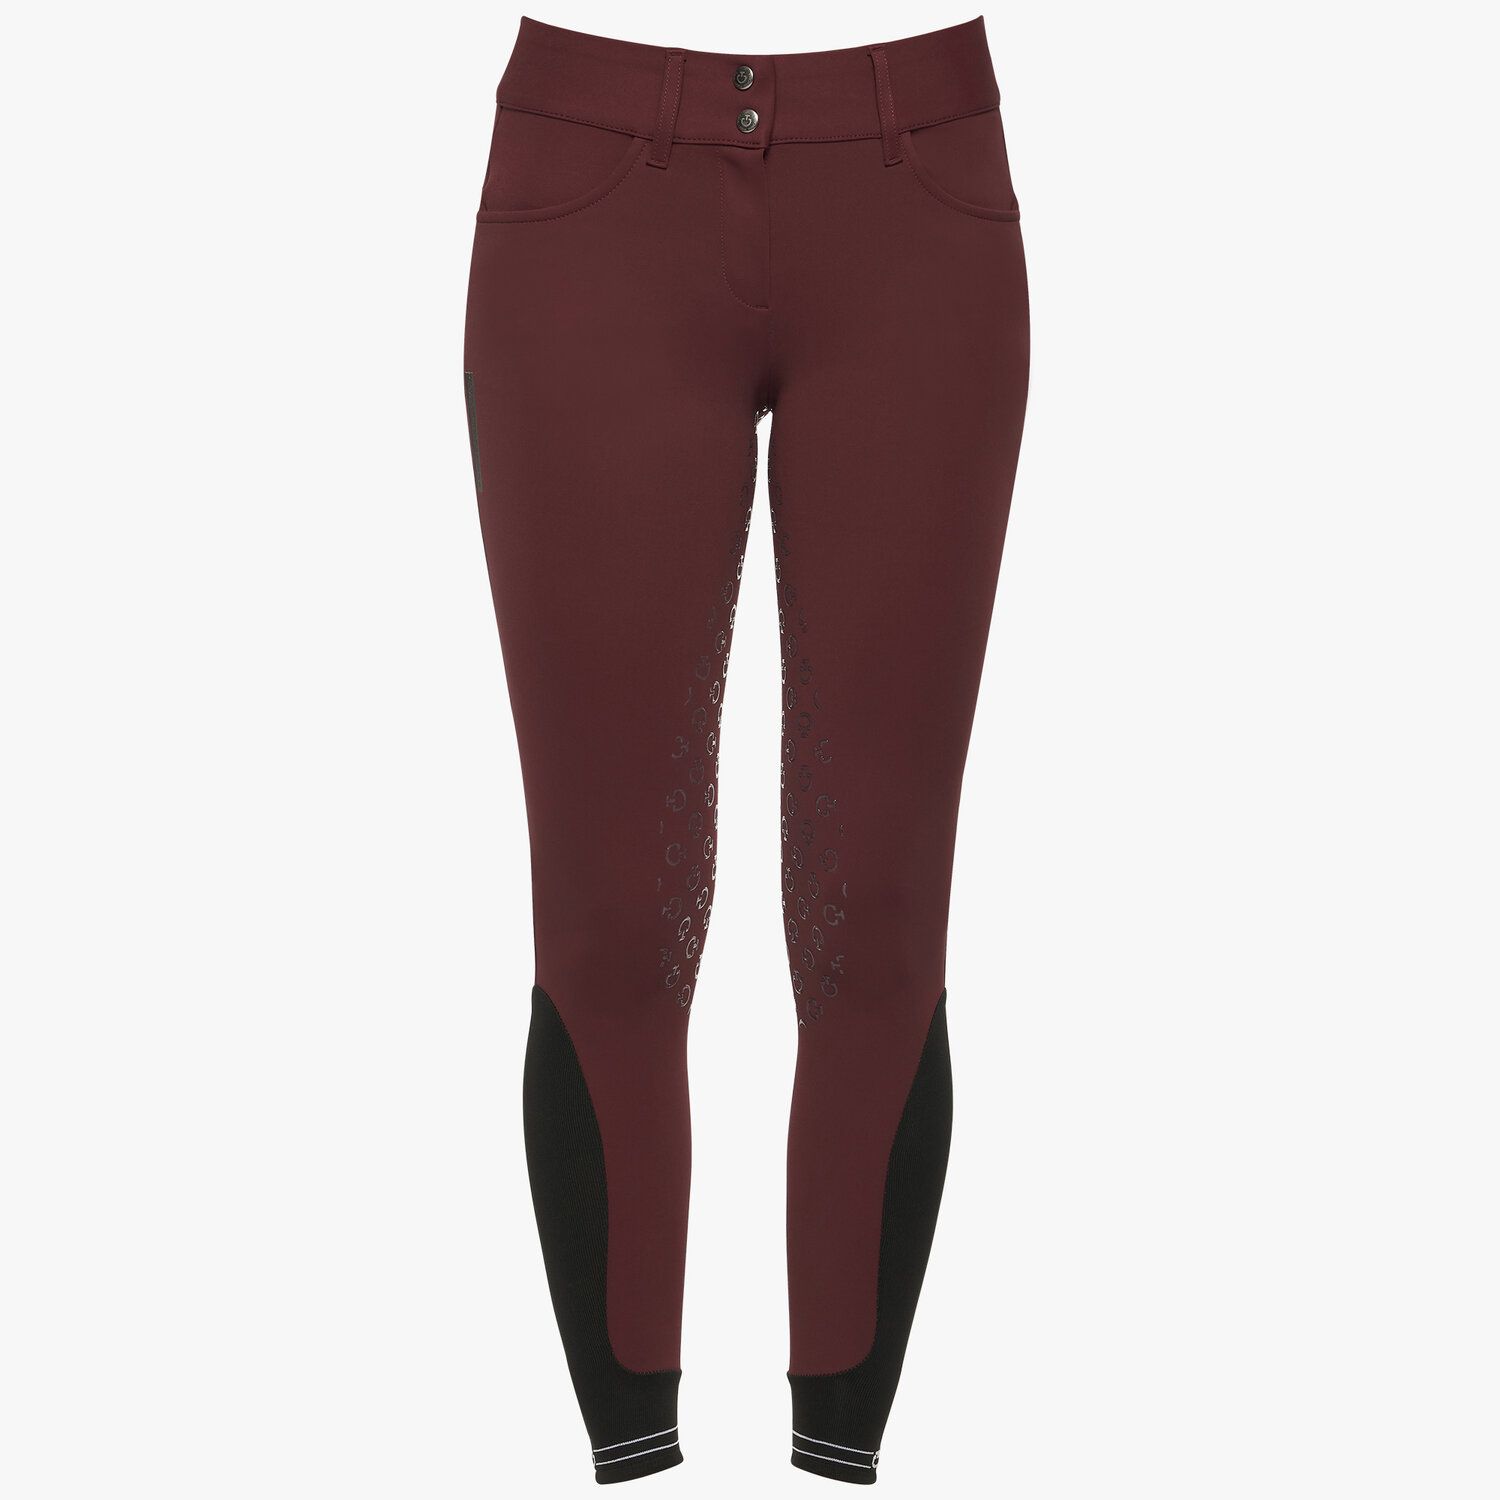 Cavalleria Toscana Women's dressage breeches with perforated logo tape BORDEAUX-2